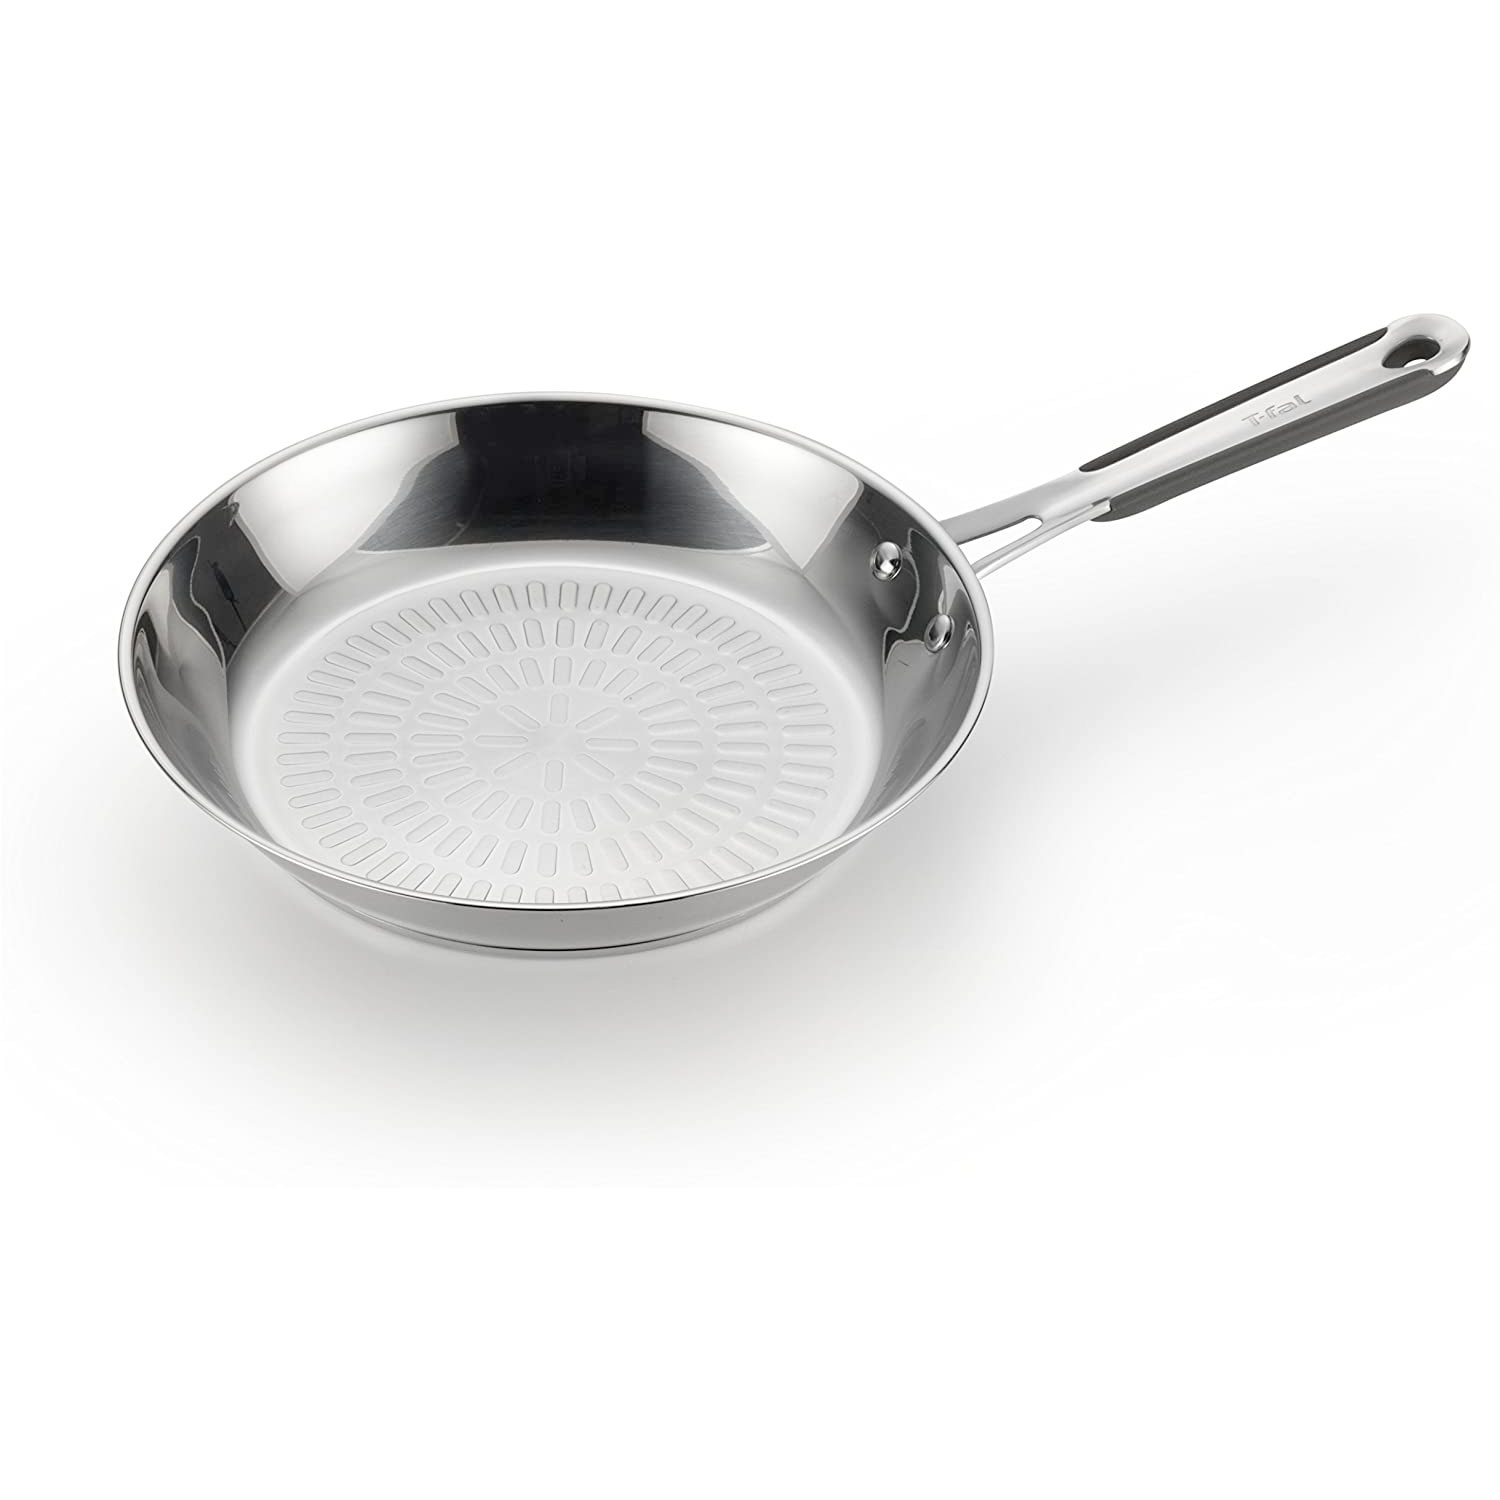 Amazon：T-fal Stainless Steel Frypan(26cm)只卖$14.92